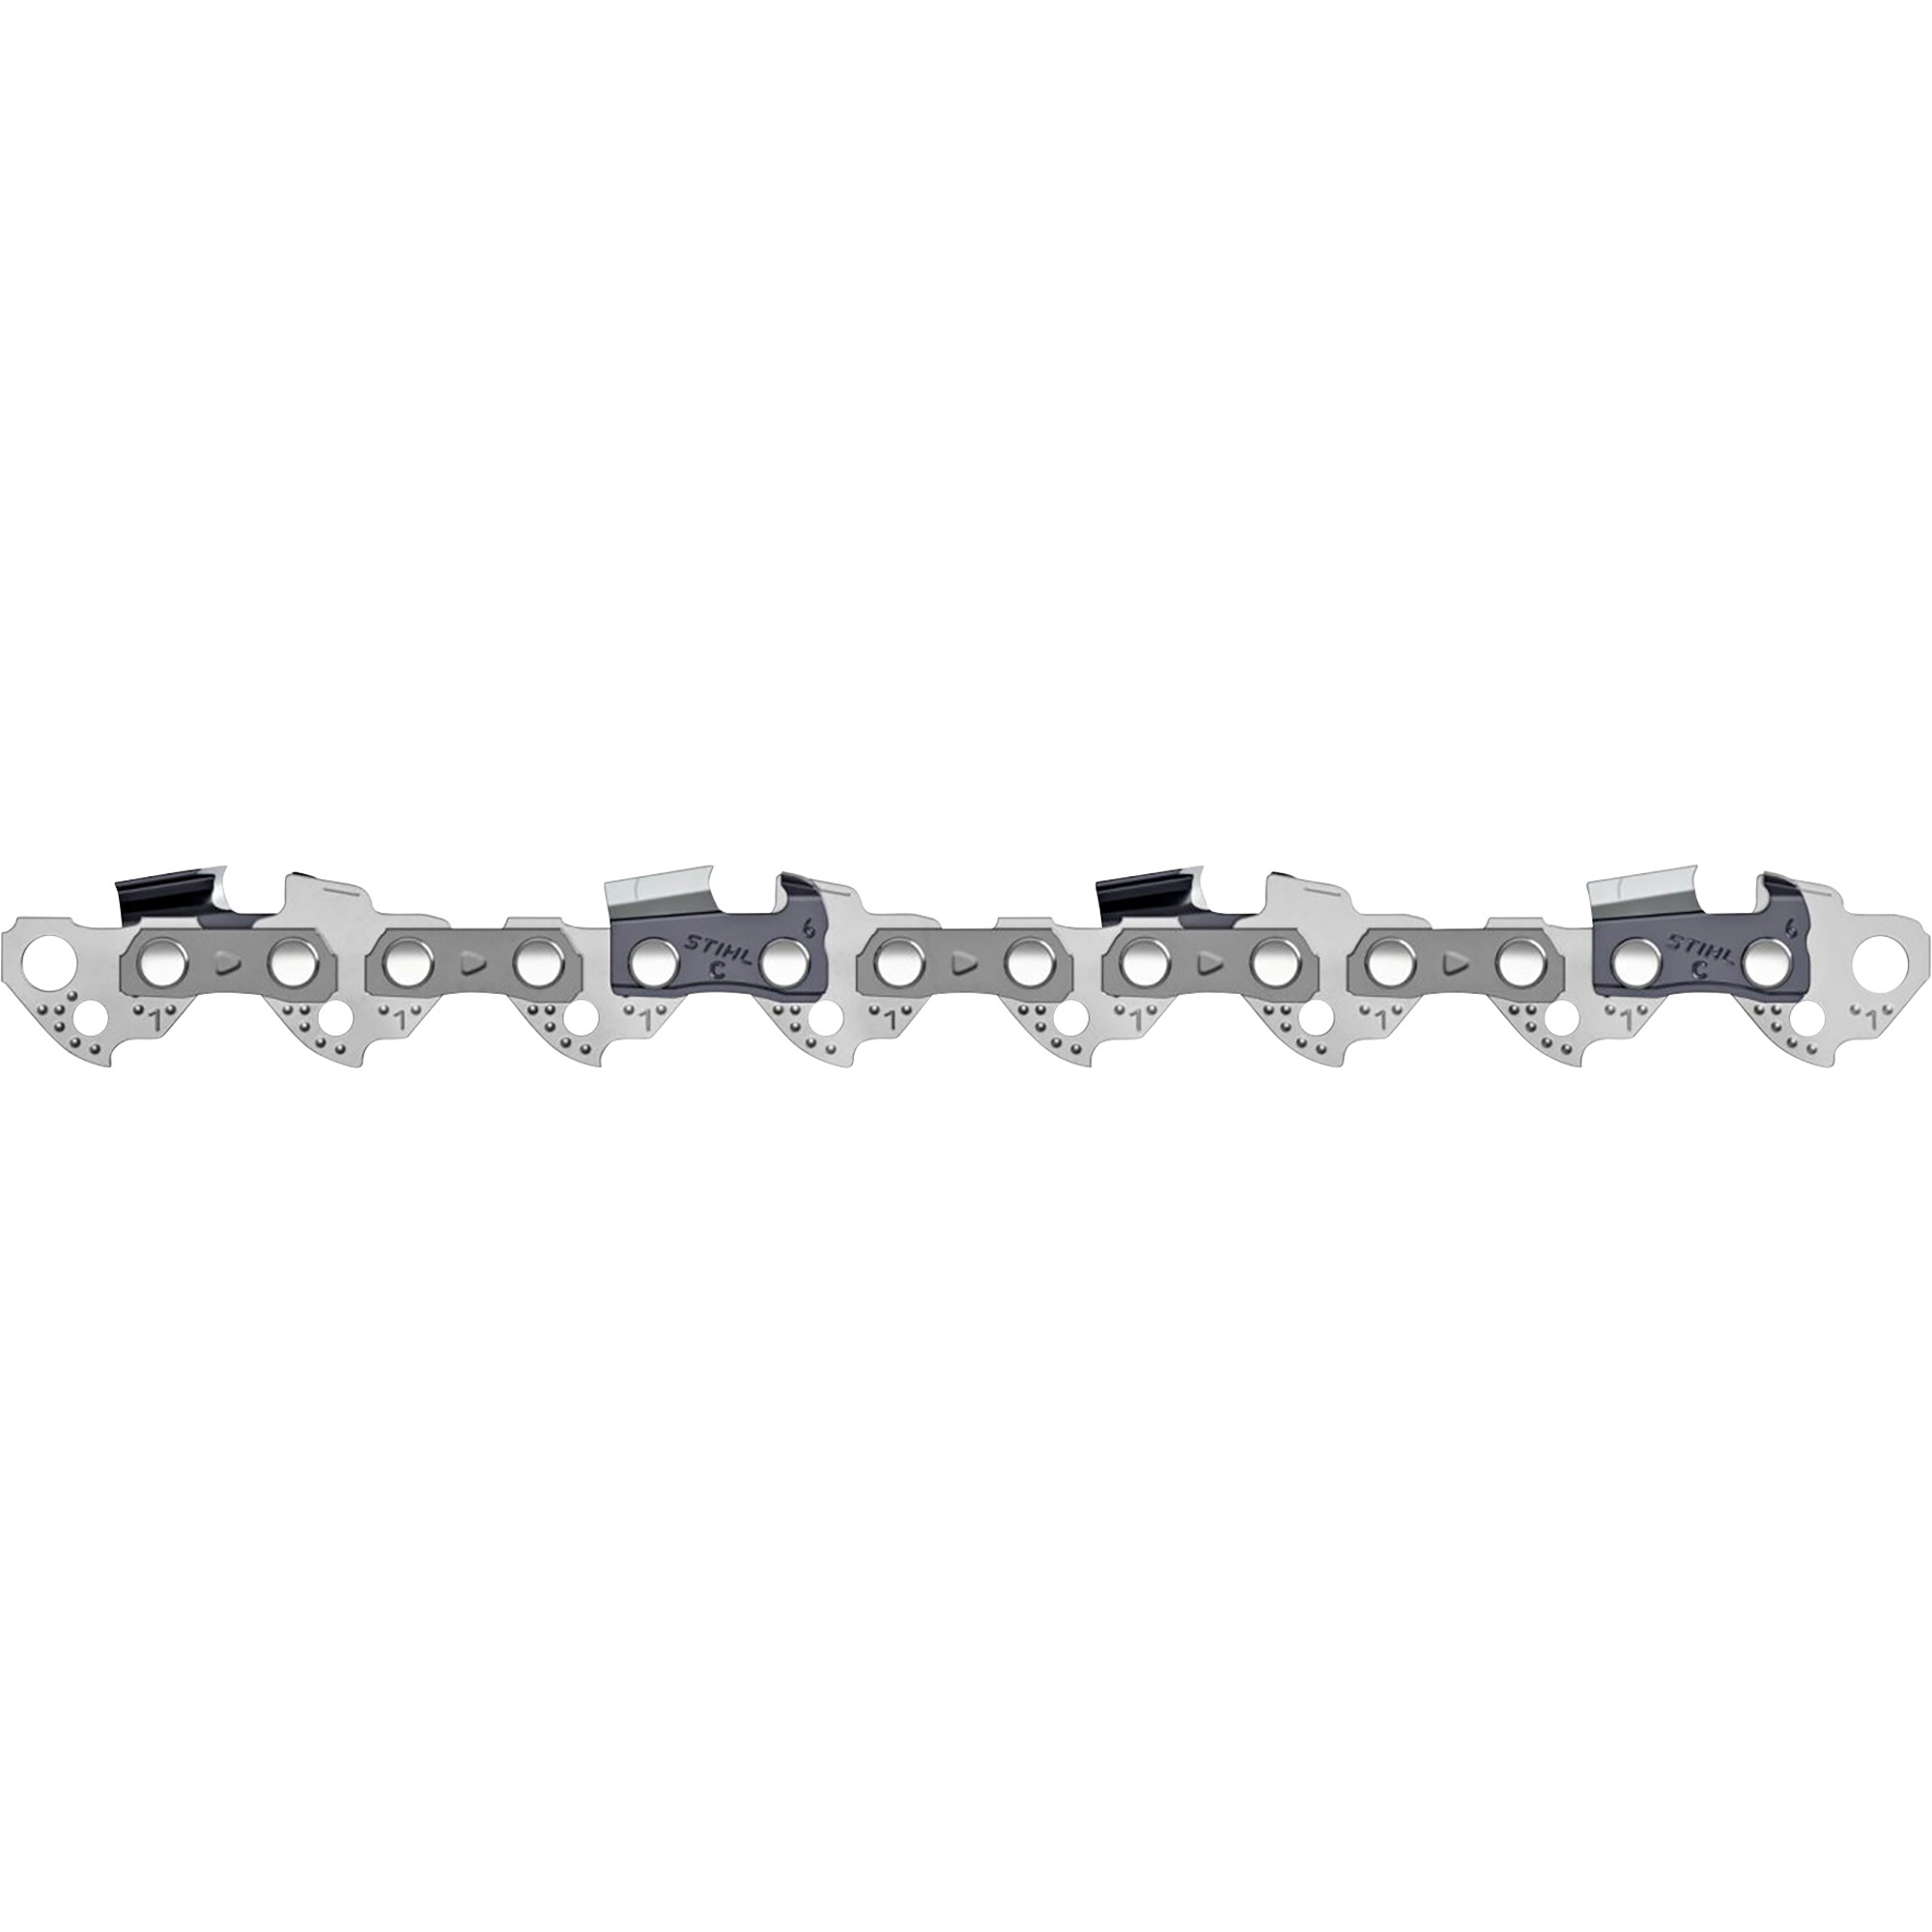 STIHL OILOMATIC 63PS3 Chainsaw Loop Chain, Fits 16Inch L Bar, 0.05Inch Gauge, 3/8Inch TPI/Pitch, 55-Links, Model 3616 005 0055